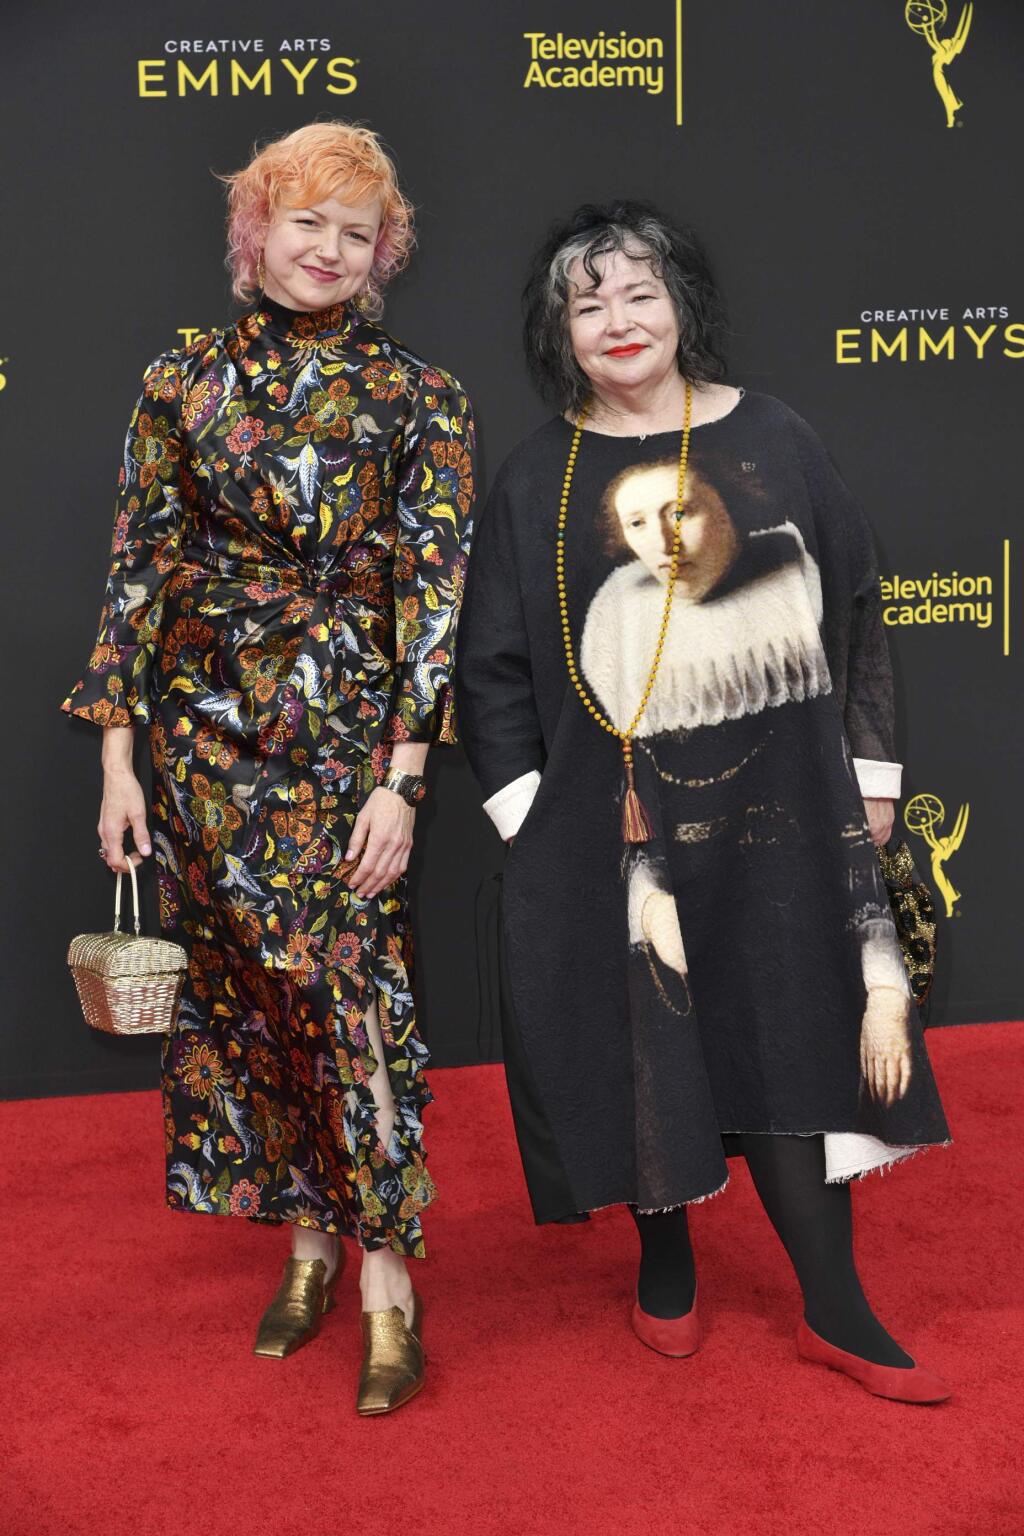 Costume designers Darci Cheyne, left, and Debra Hanson arrive at night two of the Creative Arts Emmy Awards on Sunday, Sept. 15, 2019, at the Microsoft Theater in Los Angeles. (Photo by Richard Shotwell/Invision/AP)